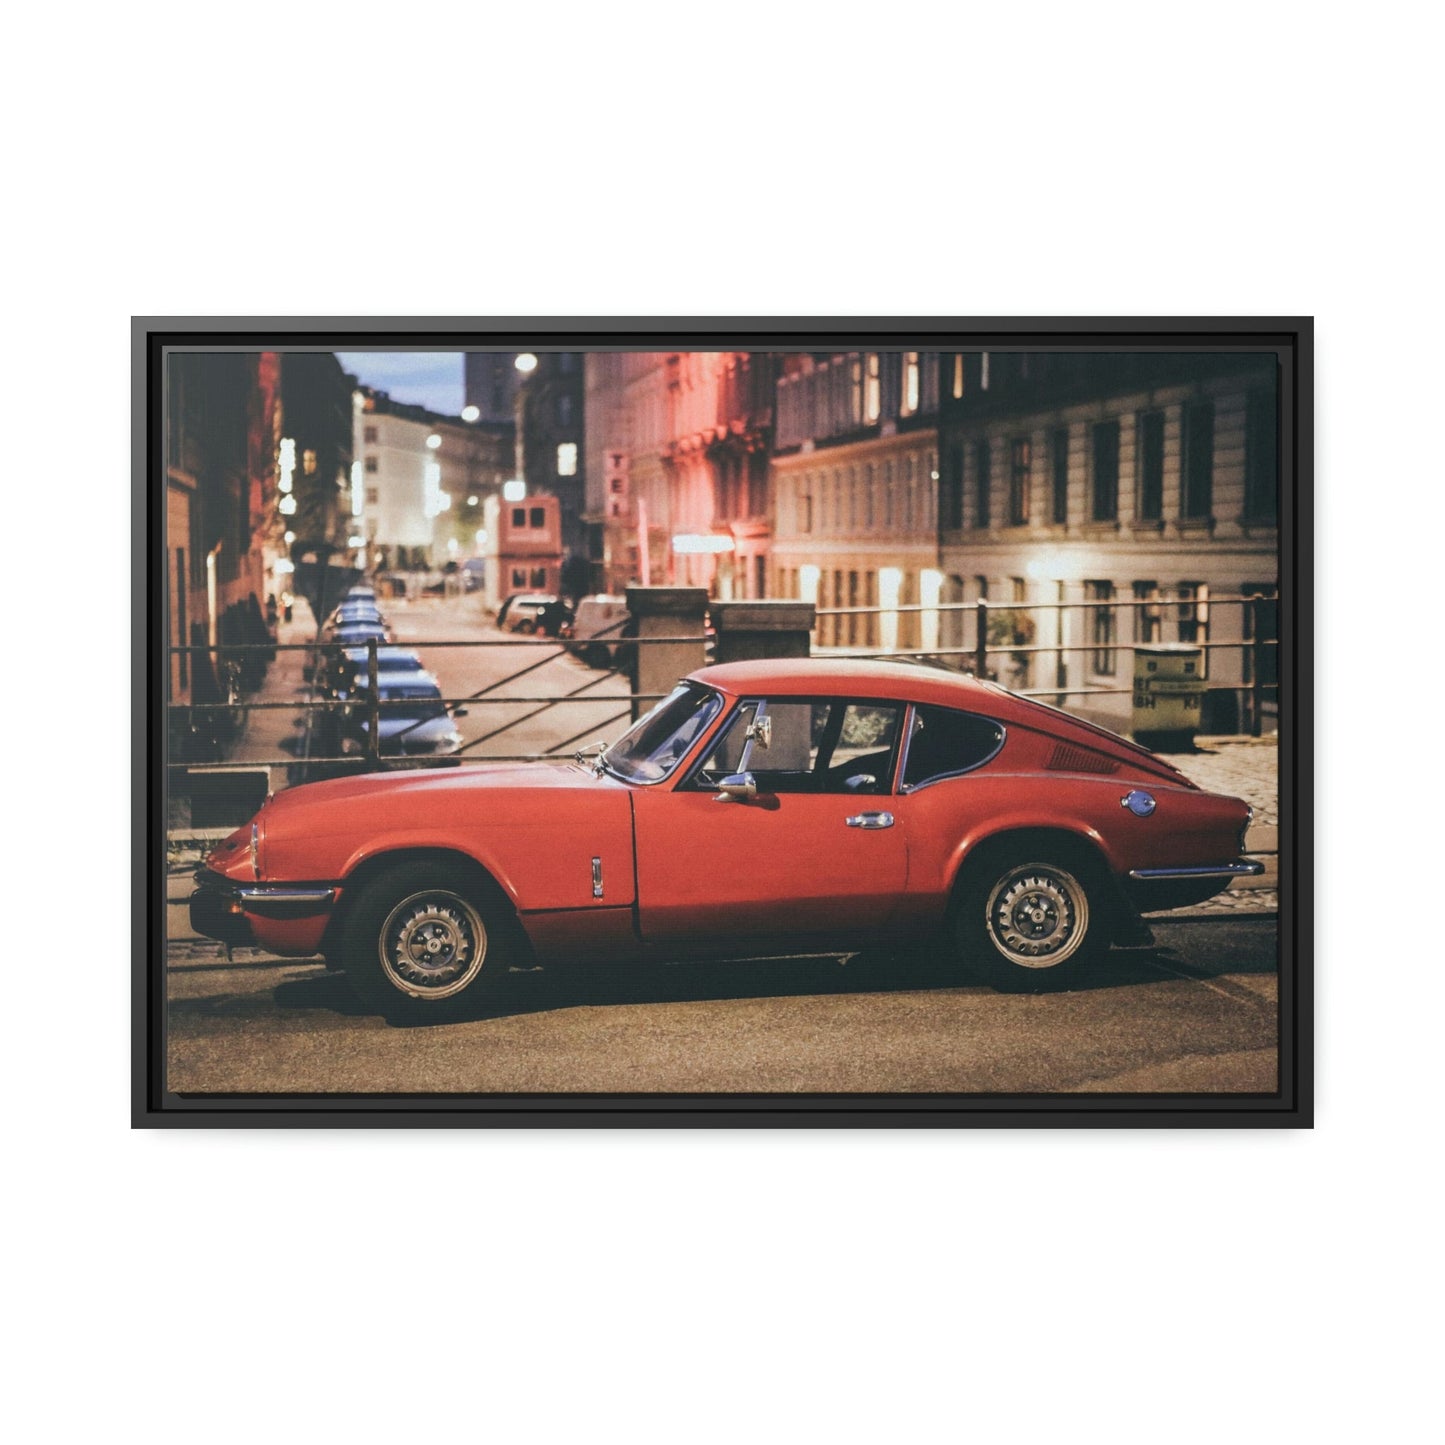 The Classic Corvette: A Striking Framed Poster Print for Car Enthusiasts